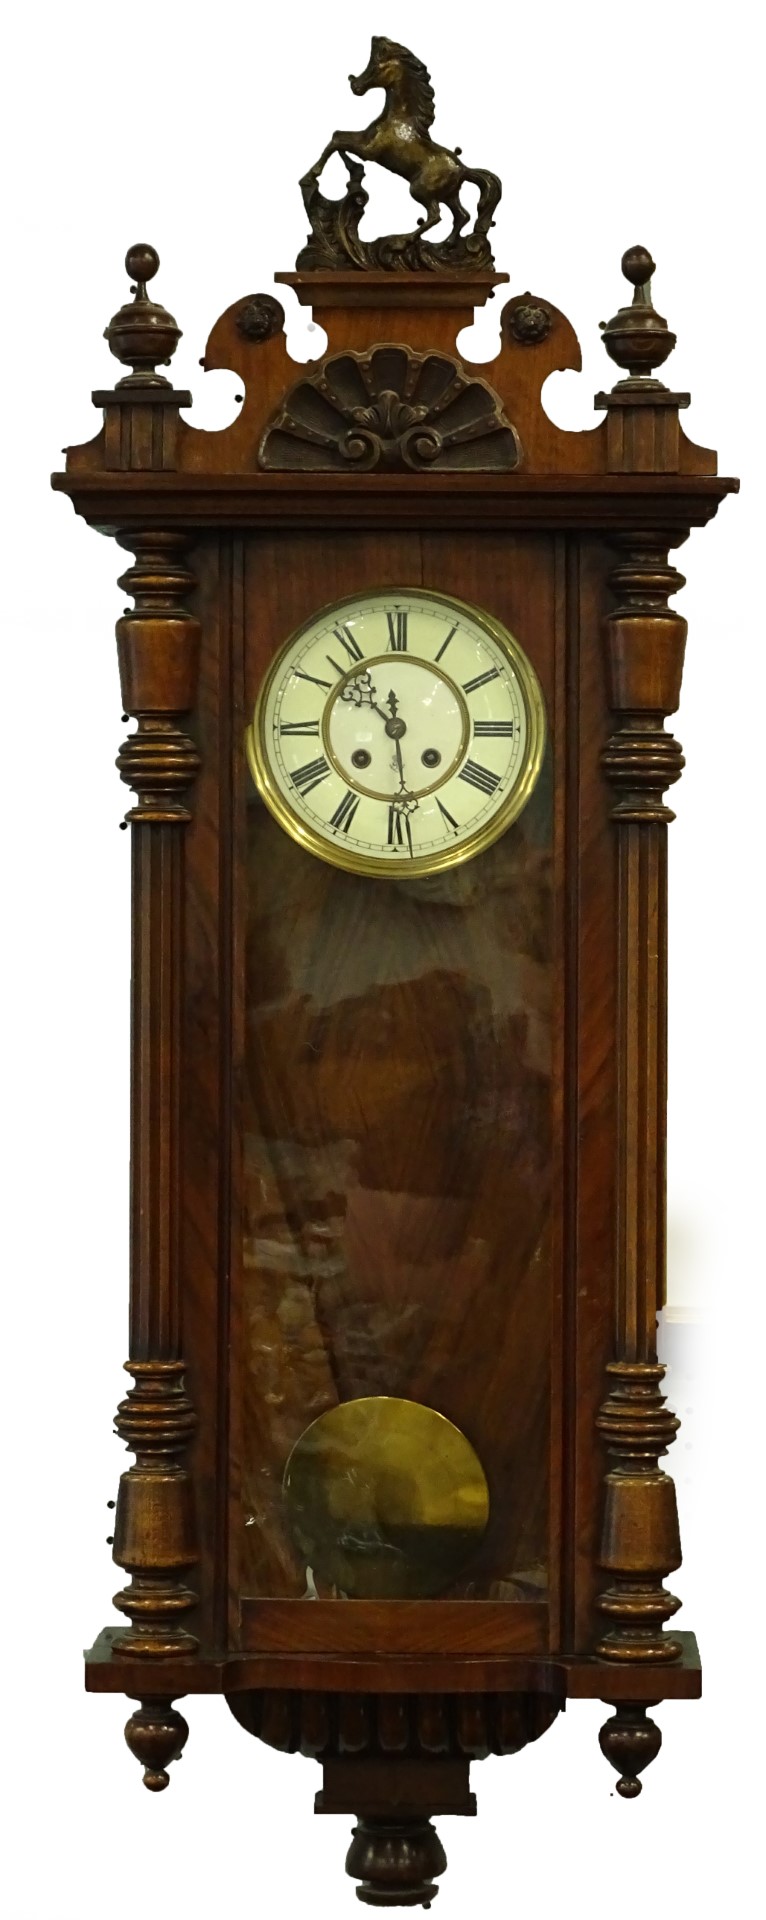 A Gustav Becker late 19th/early 20thC Vienna wall clock, the walnut case with a composite rearing